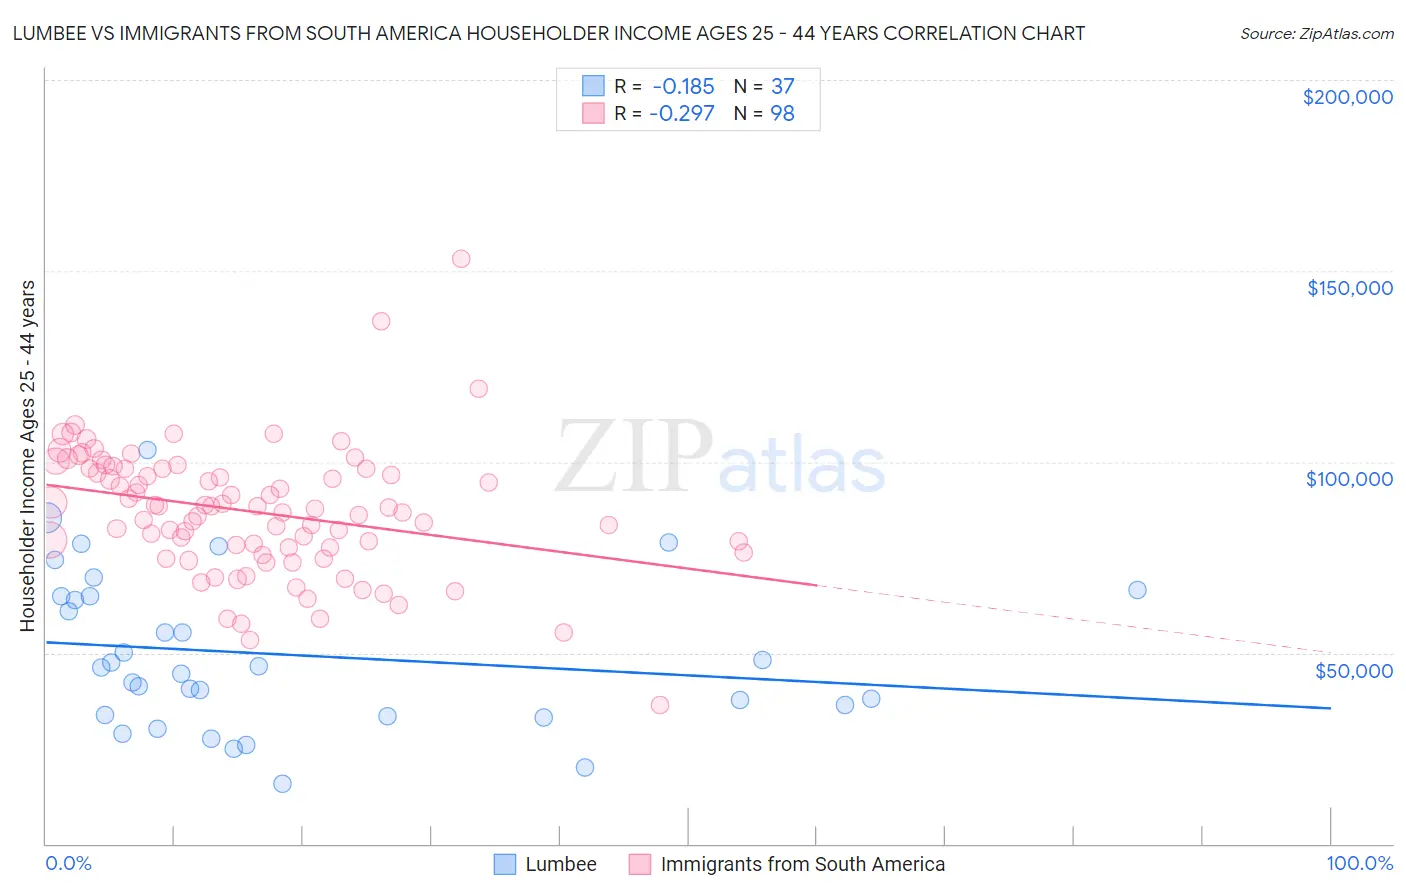 Lumbee vs Immigrants from South America Householder Income Ages 25 - 44 years